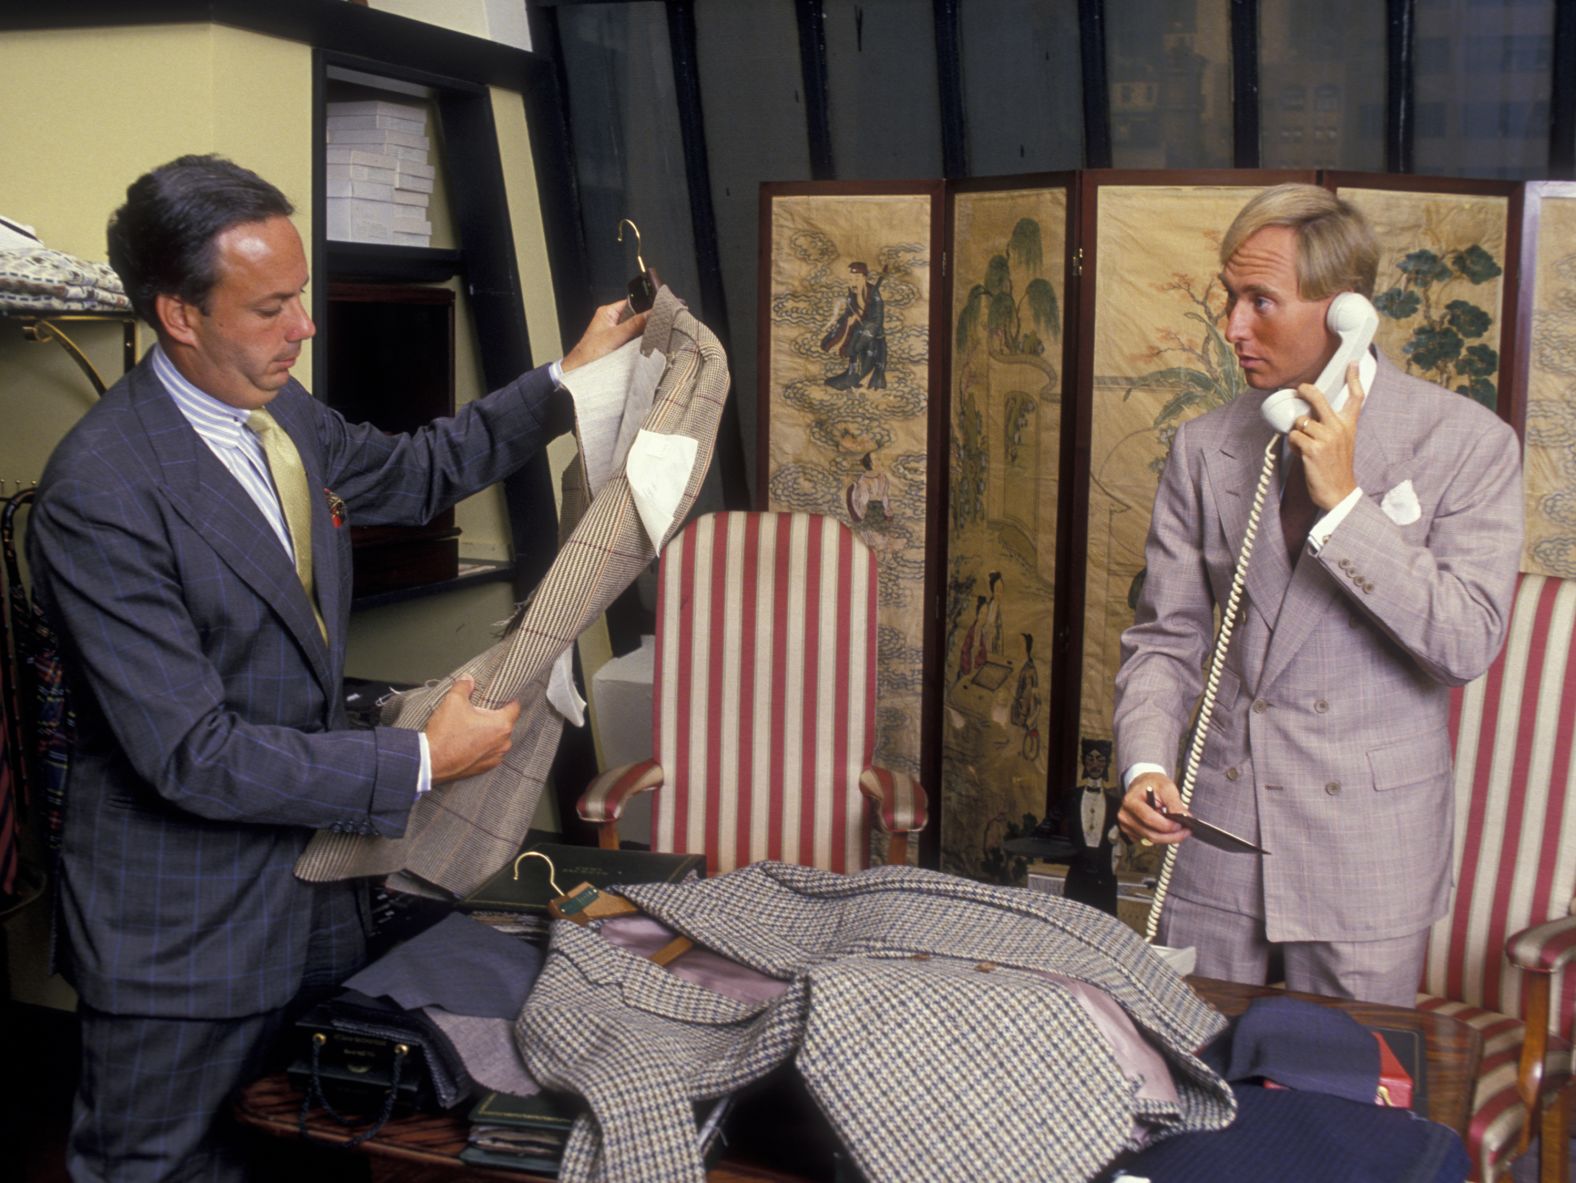 Stone and designer Alan Flusserare seen at the Alan Flusser Boutique in New York in August 1987.